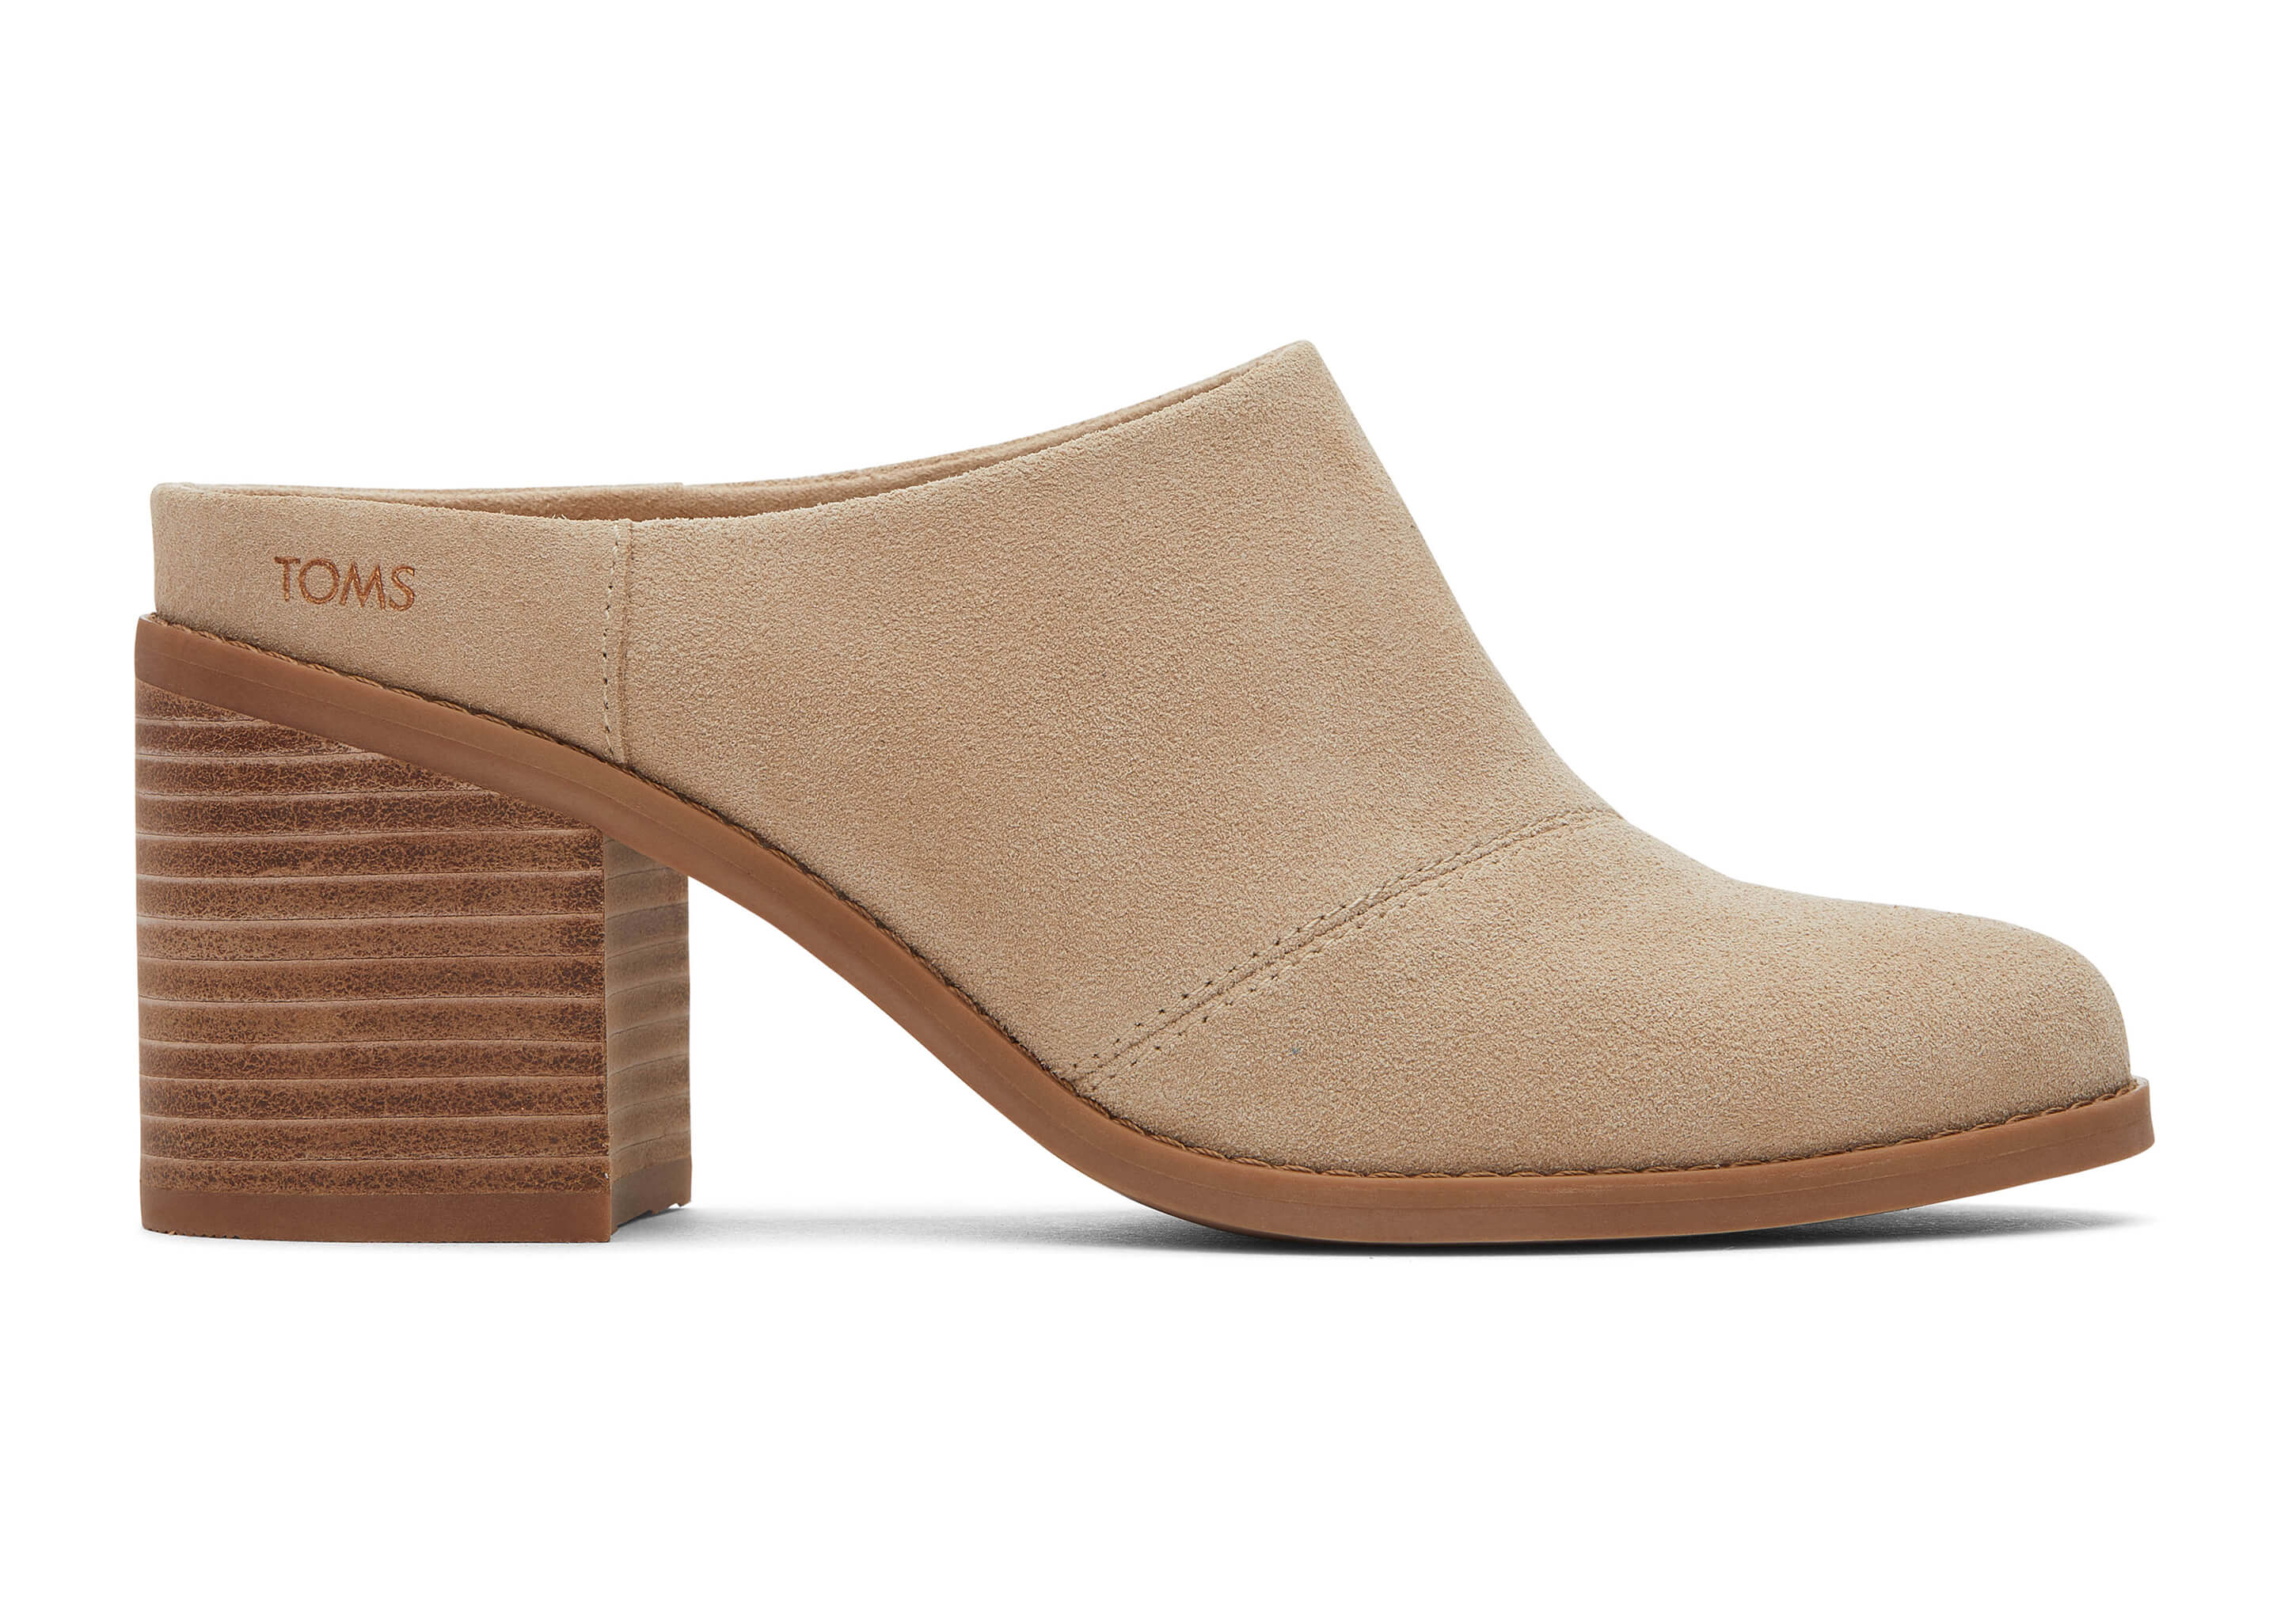 TOMS Women's Natural Suede Evelyn Mule Boots